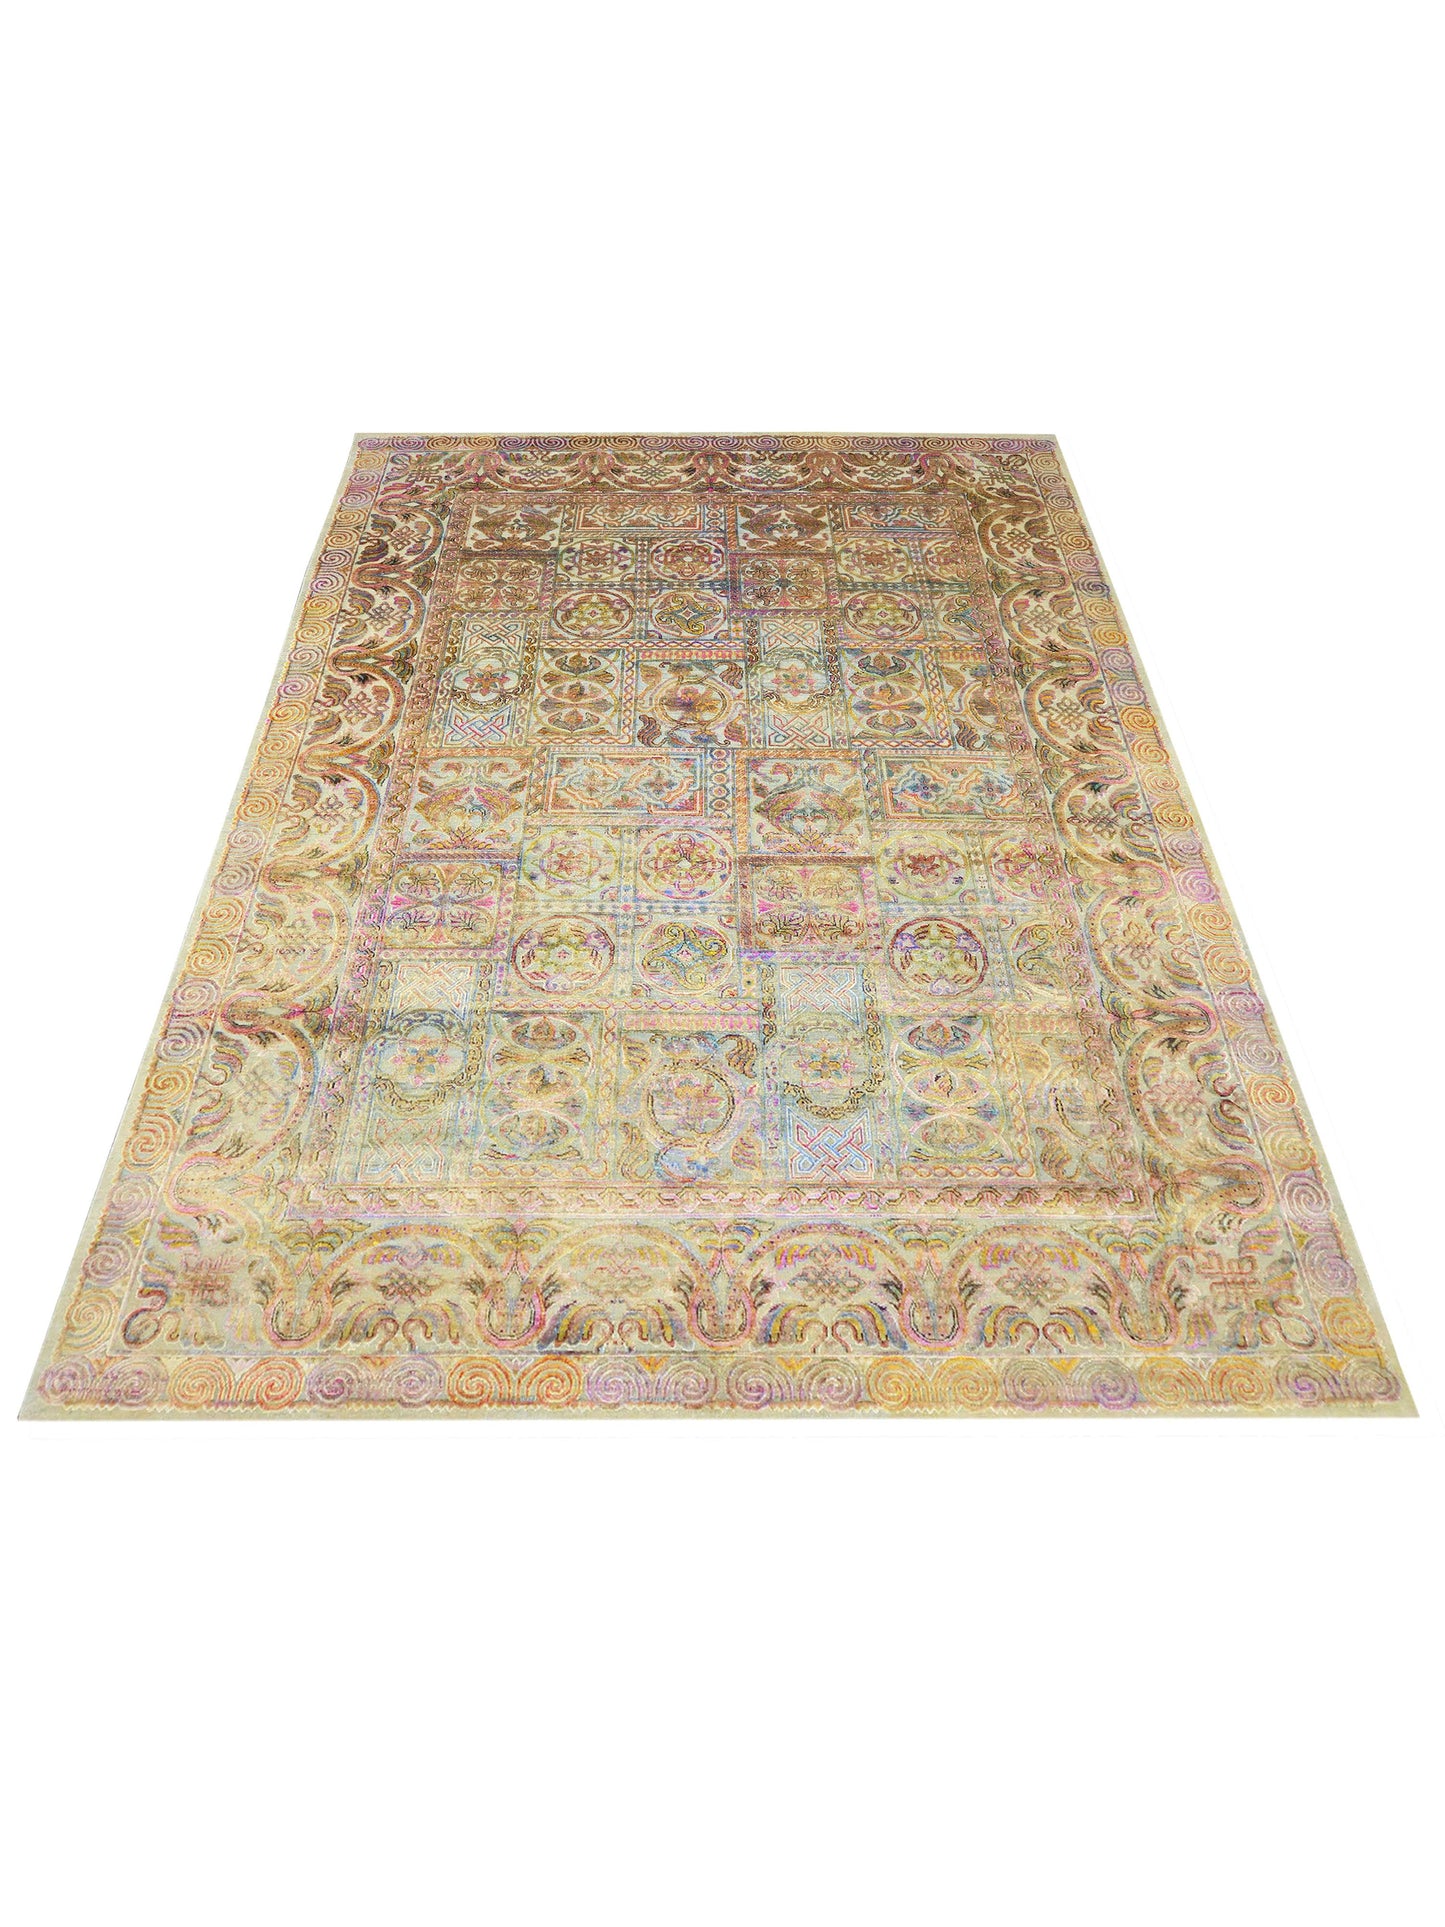 Get trendy with Gold, Pink and Multy Sari Silk Modern Handknotted Area Rug 8.11x12.3ft 272x373Cms - Modern Rugs available at Jaipur Oriental Rugs. Grab yours for $5400.00 today!